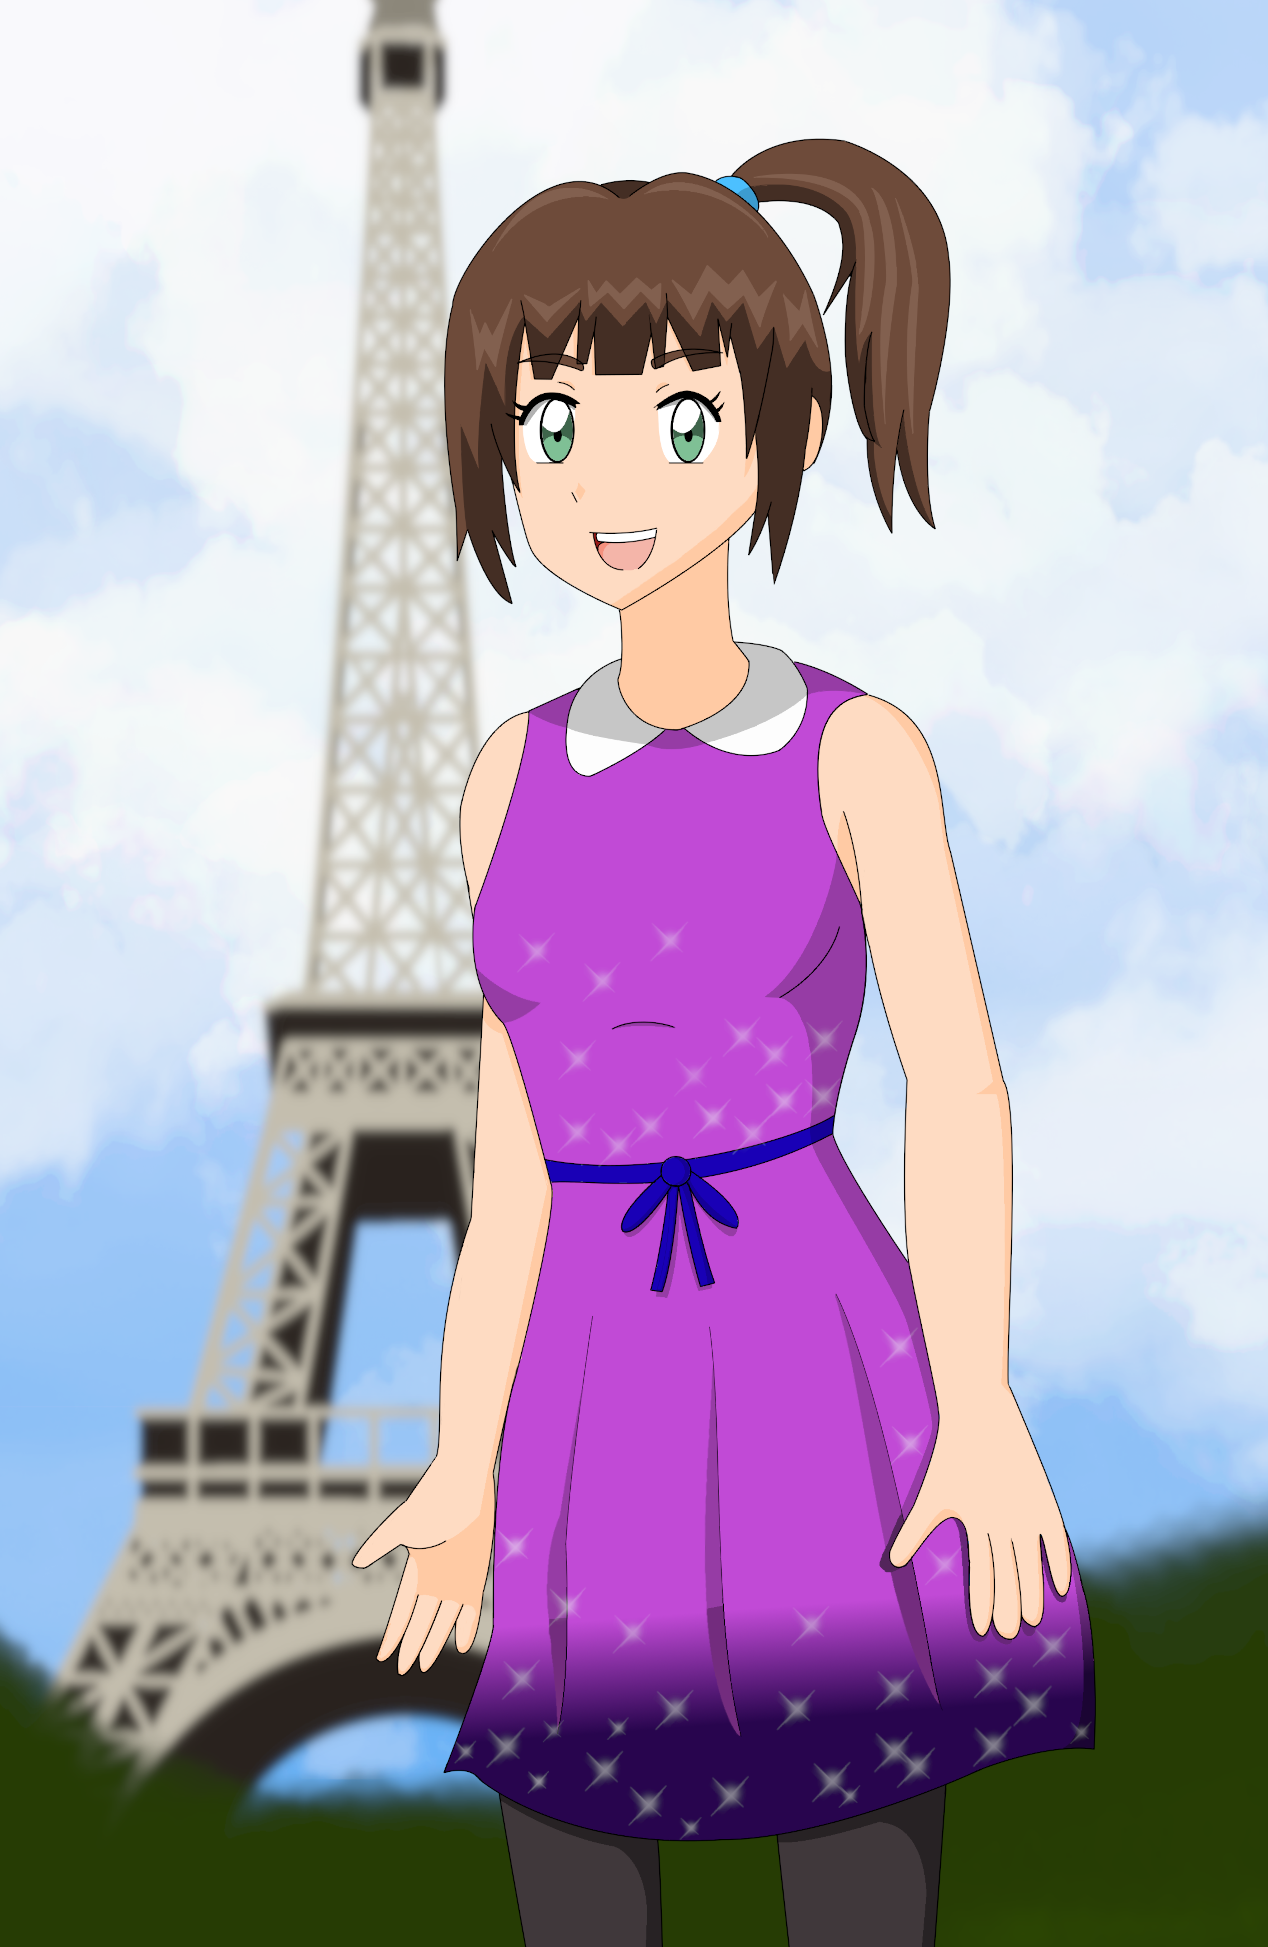 Emily the cutie from France by RevolutionHellCowboy